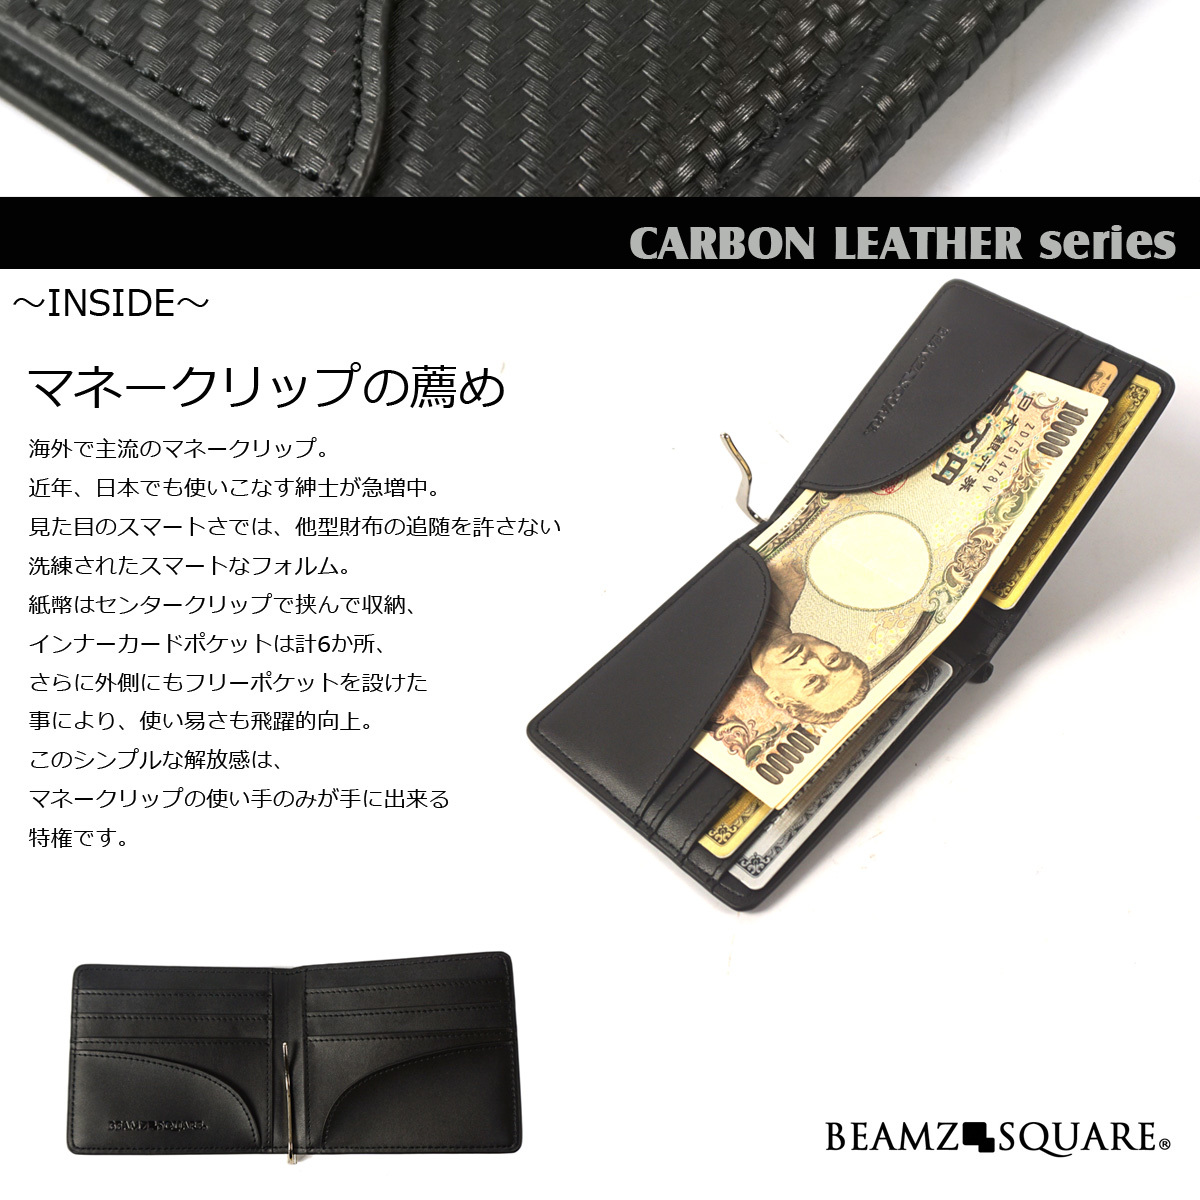 [ free shipping ]10310* carbon leather money clip * stylish cow leather made .basami* gentleman is Smart & stylish . payment * popular brand 